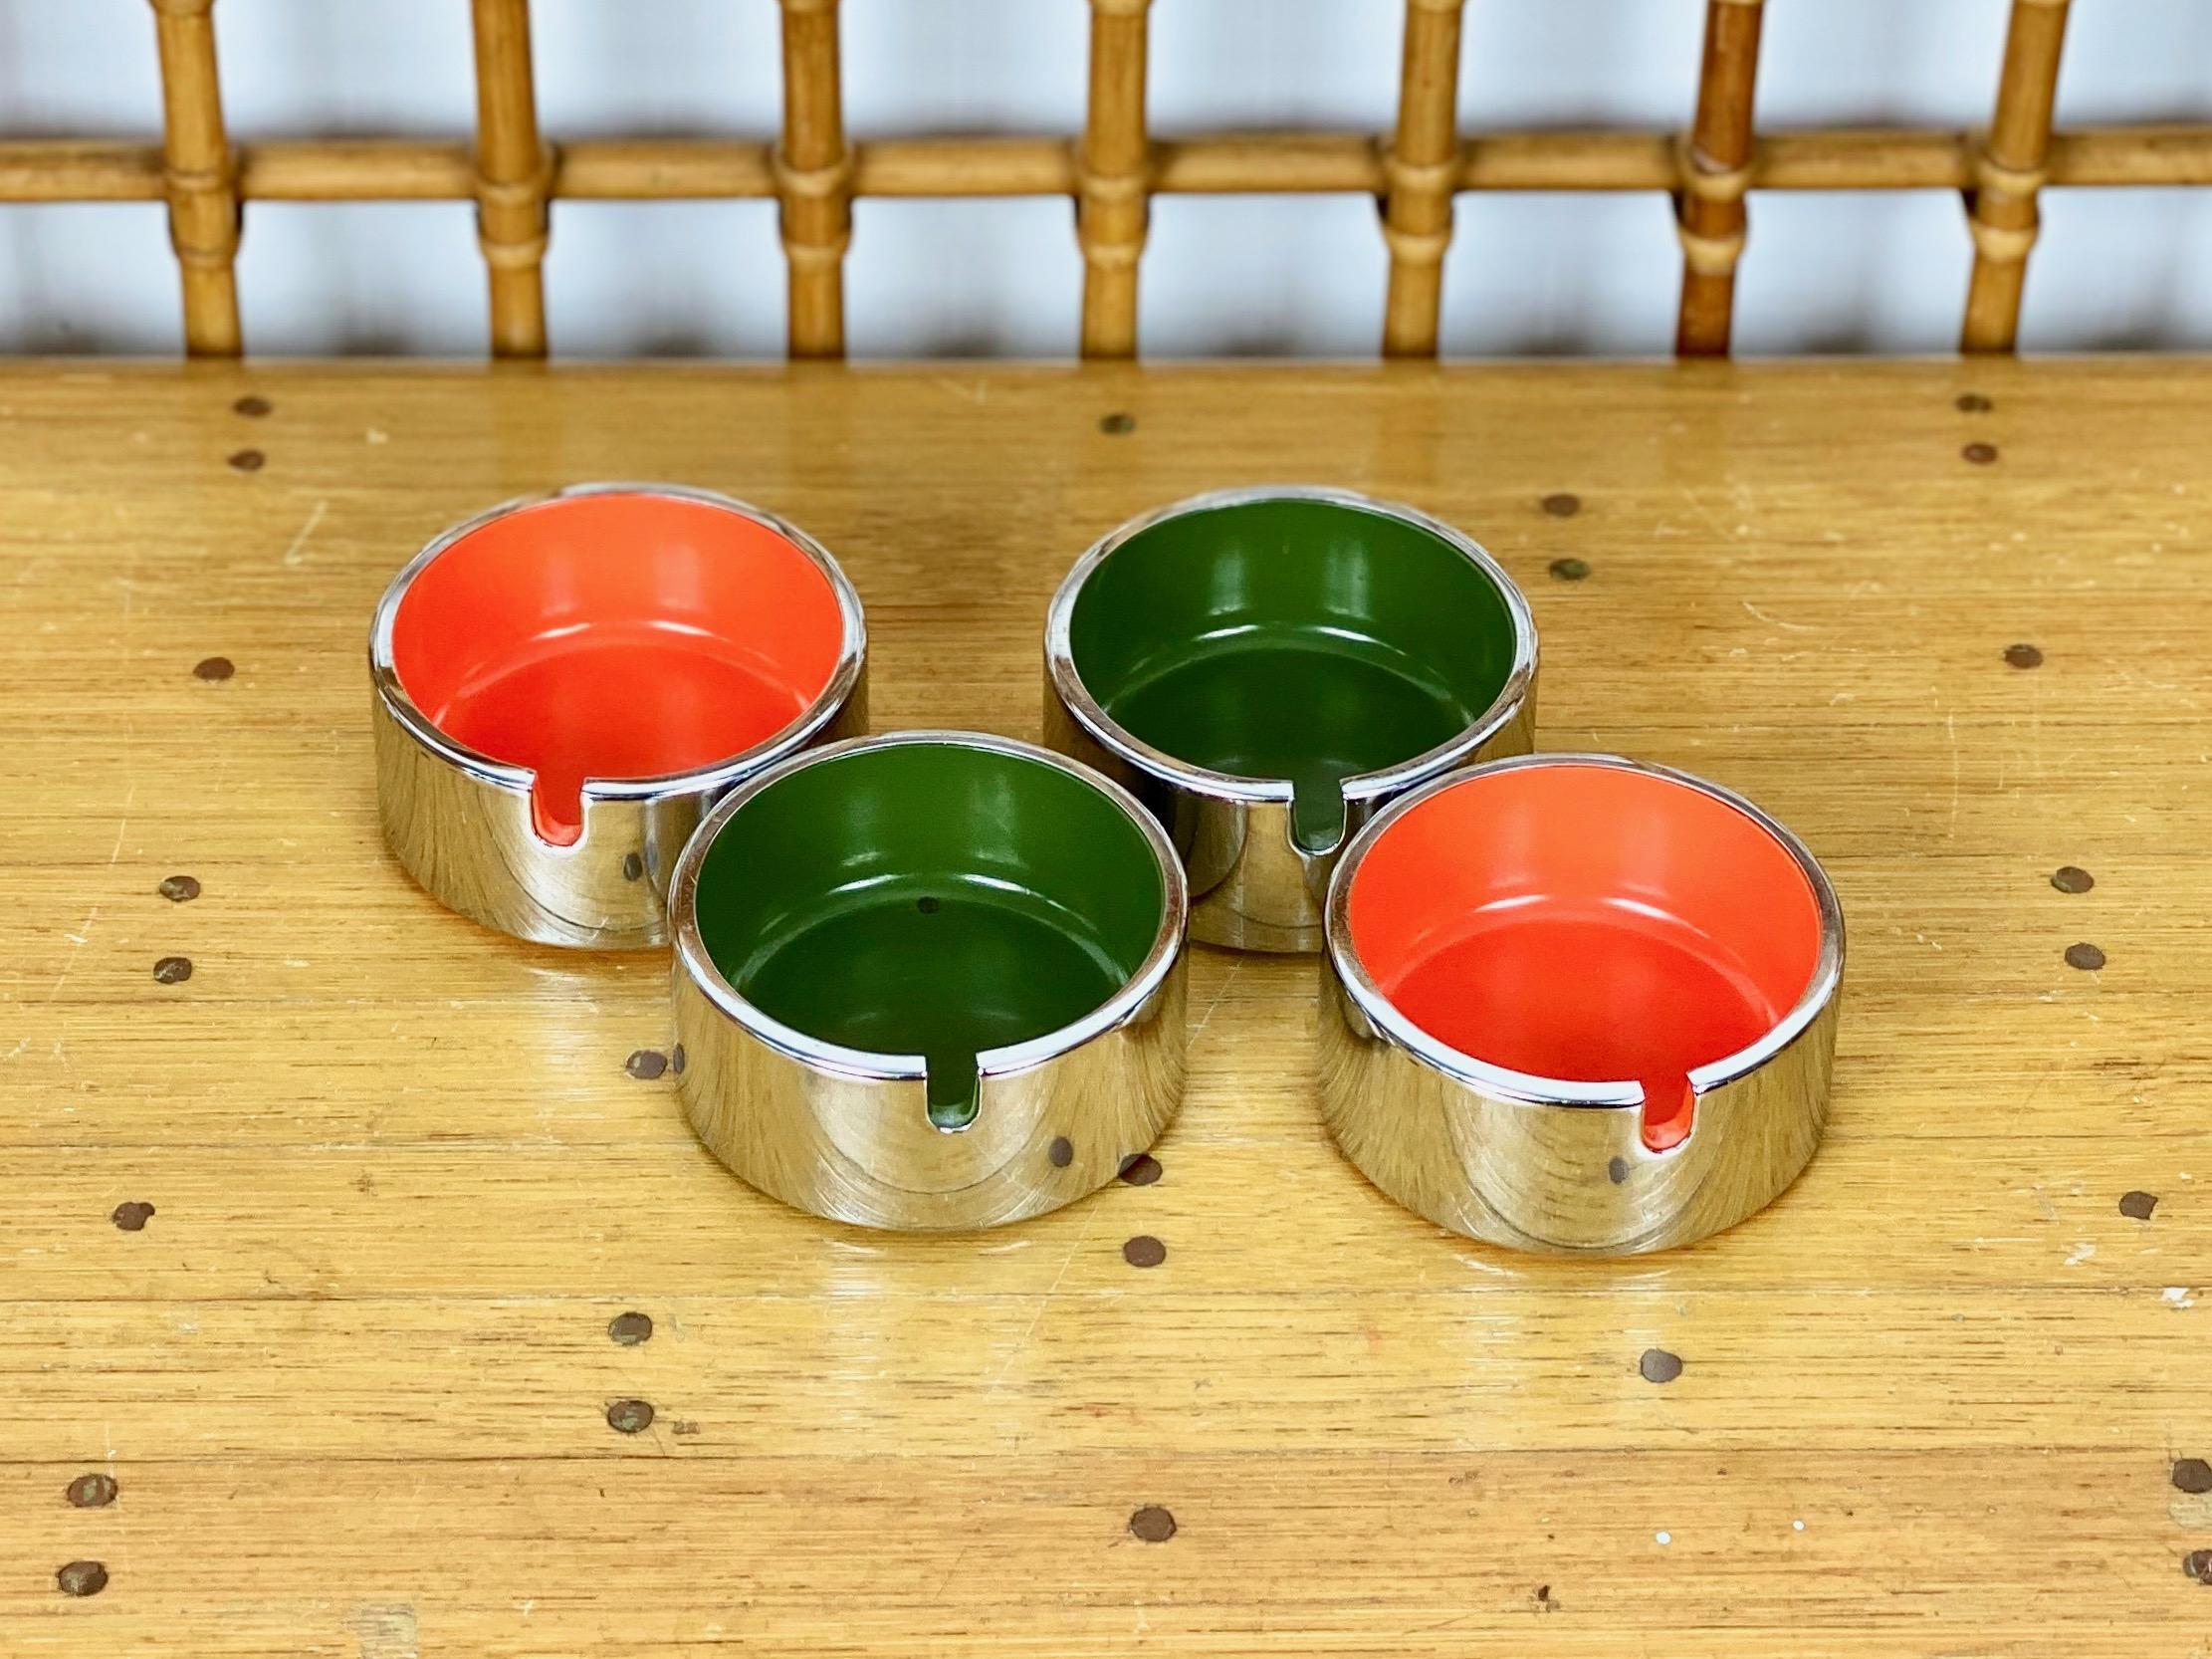 Set of 4 stackable ashtrays (Pat. Pend. 4018039) by the Japanese designer Isamu Kenmochi.

The ashtrays are marked with: 'patent pending', so these are early editions from the early 1960s before they were produced by Maru Trend Pacific inc. in Los